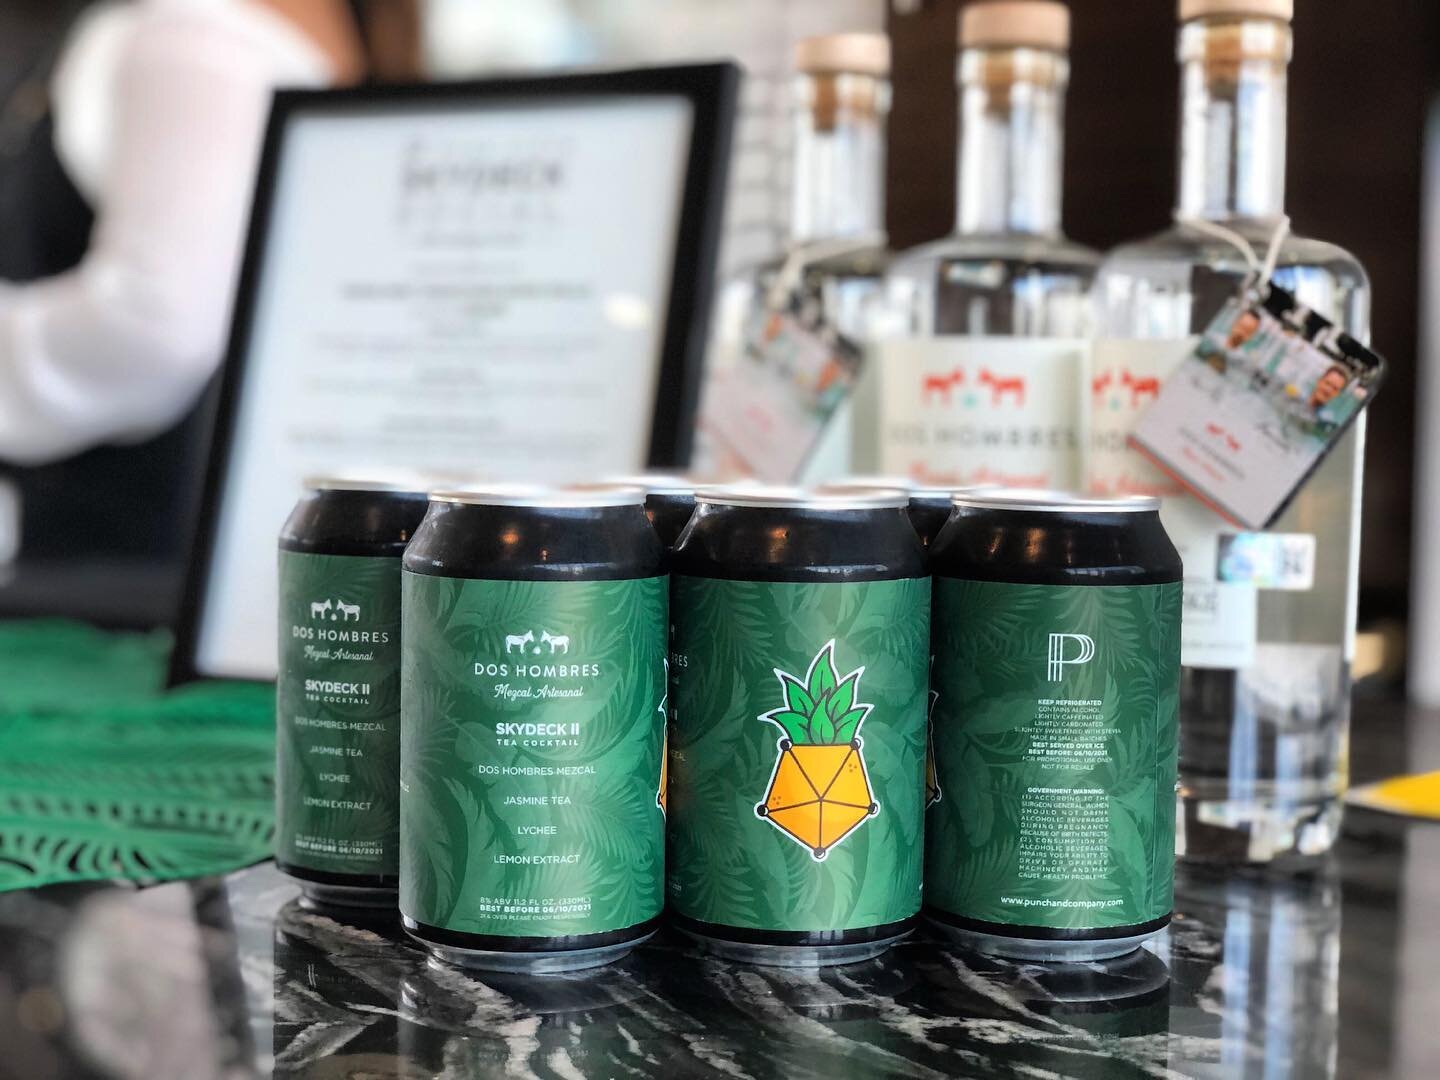 &ldquo;Sip&rdquo; happens! That&rsquo;s why we&rsquo;re here for ya! Who else is daydreaming about happy hour? 💭🍾🎉
&bull;
&bull;
&bull;
&bull;
&bull;
@doshombres @parkfifthtower @pettieprints 
#punchco #drinkpunchco #doshombres #breakingbad #happy